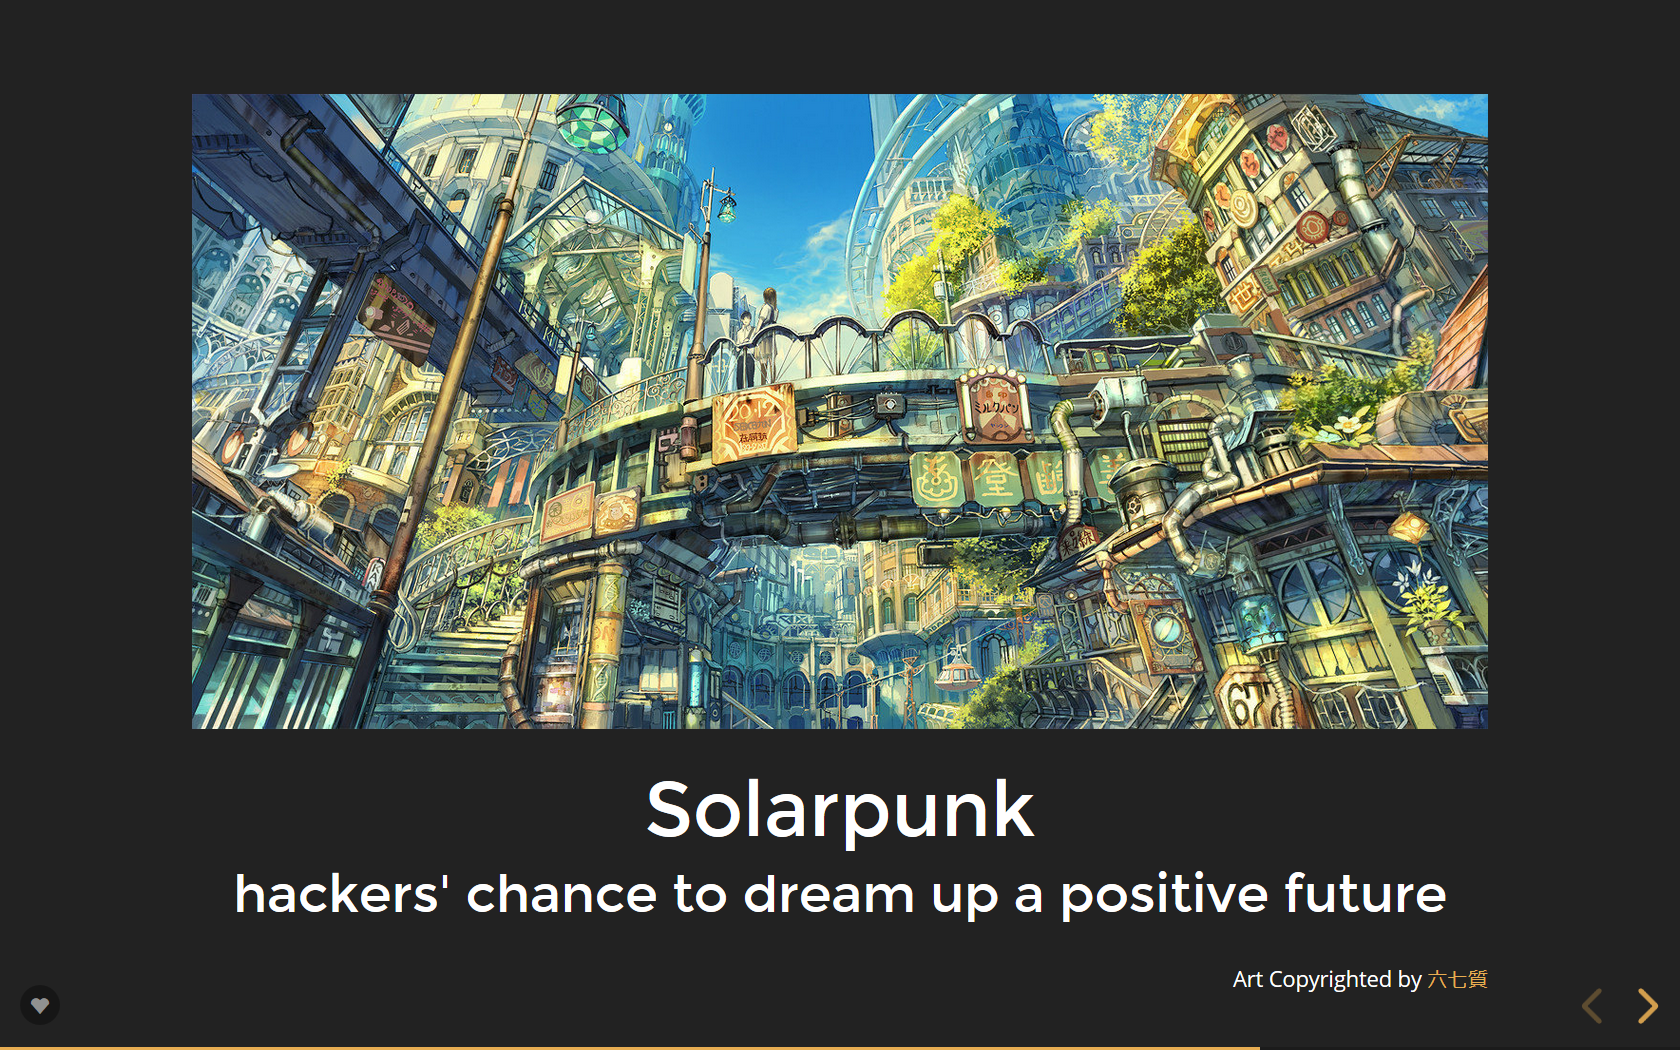 Fighting for the Future: Cyberpunk and Solarpunk Tales